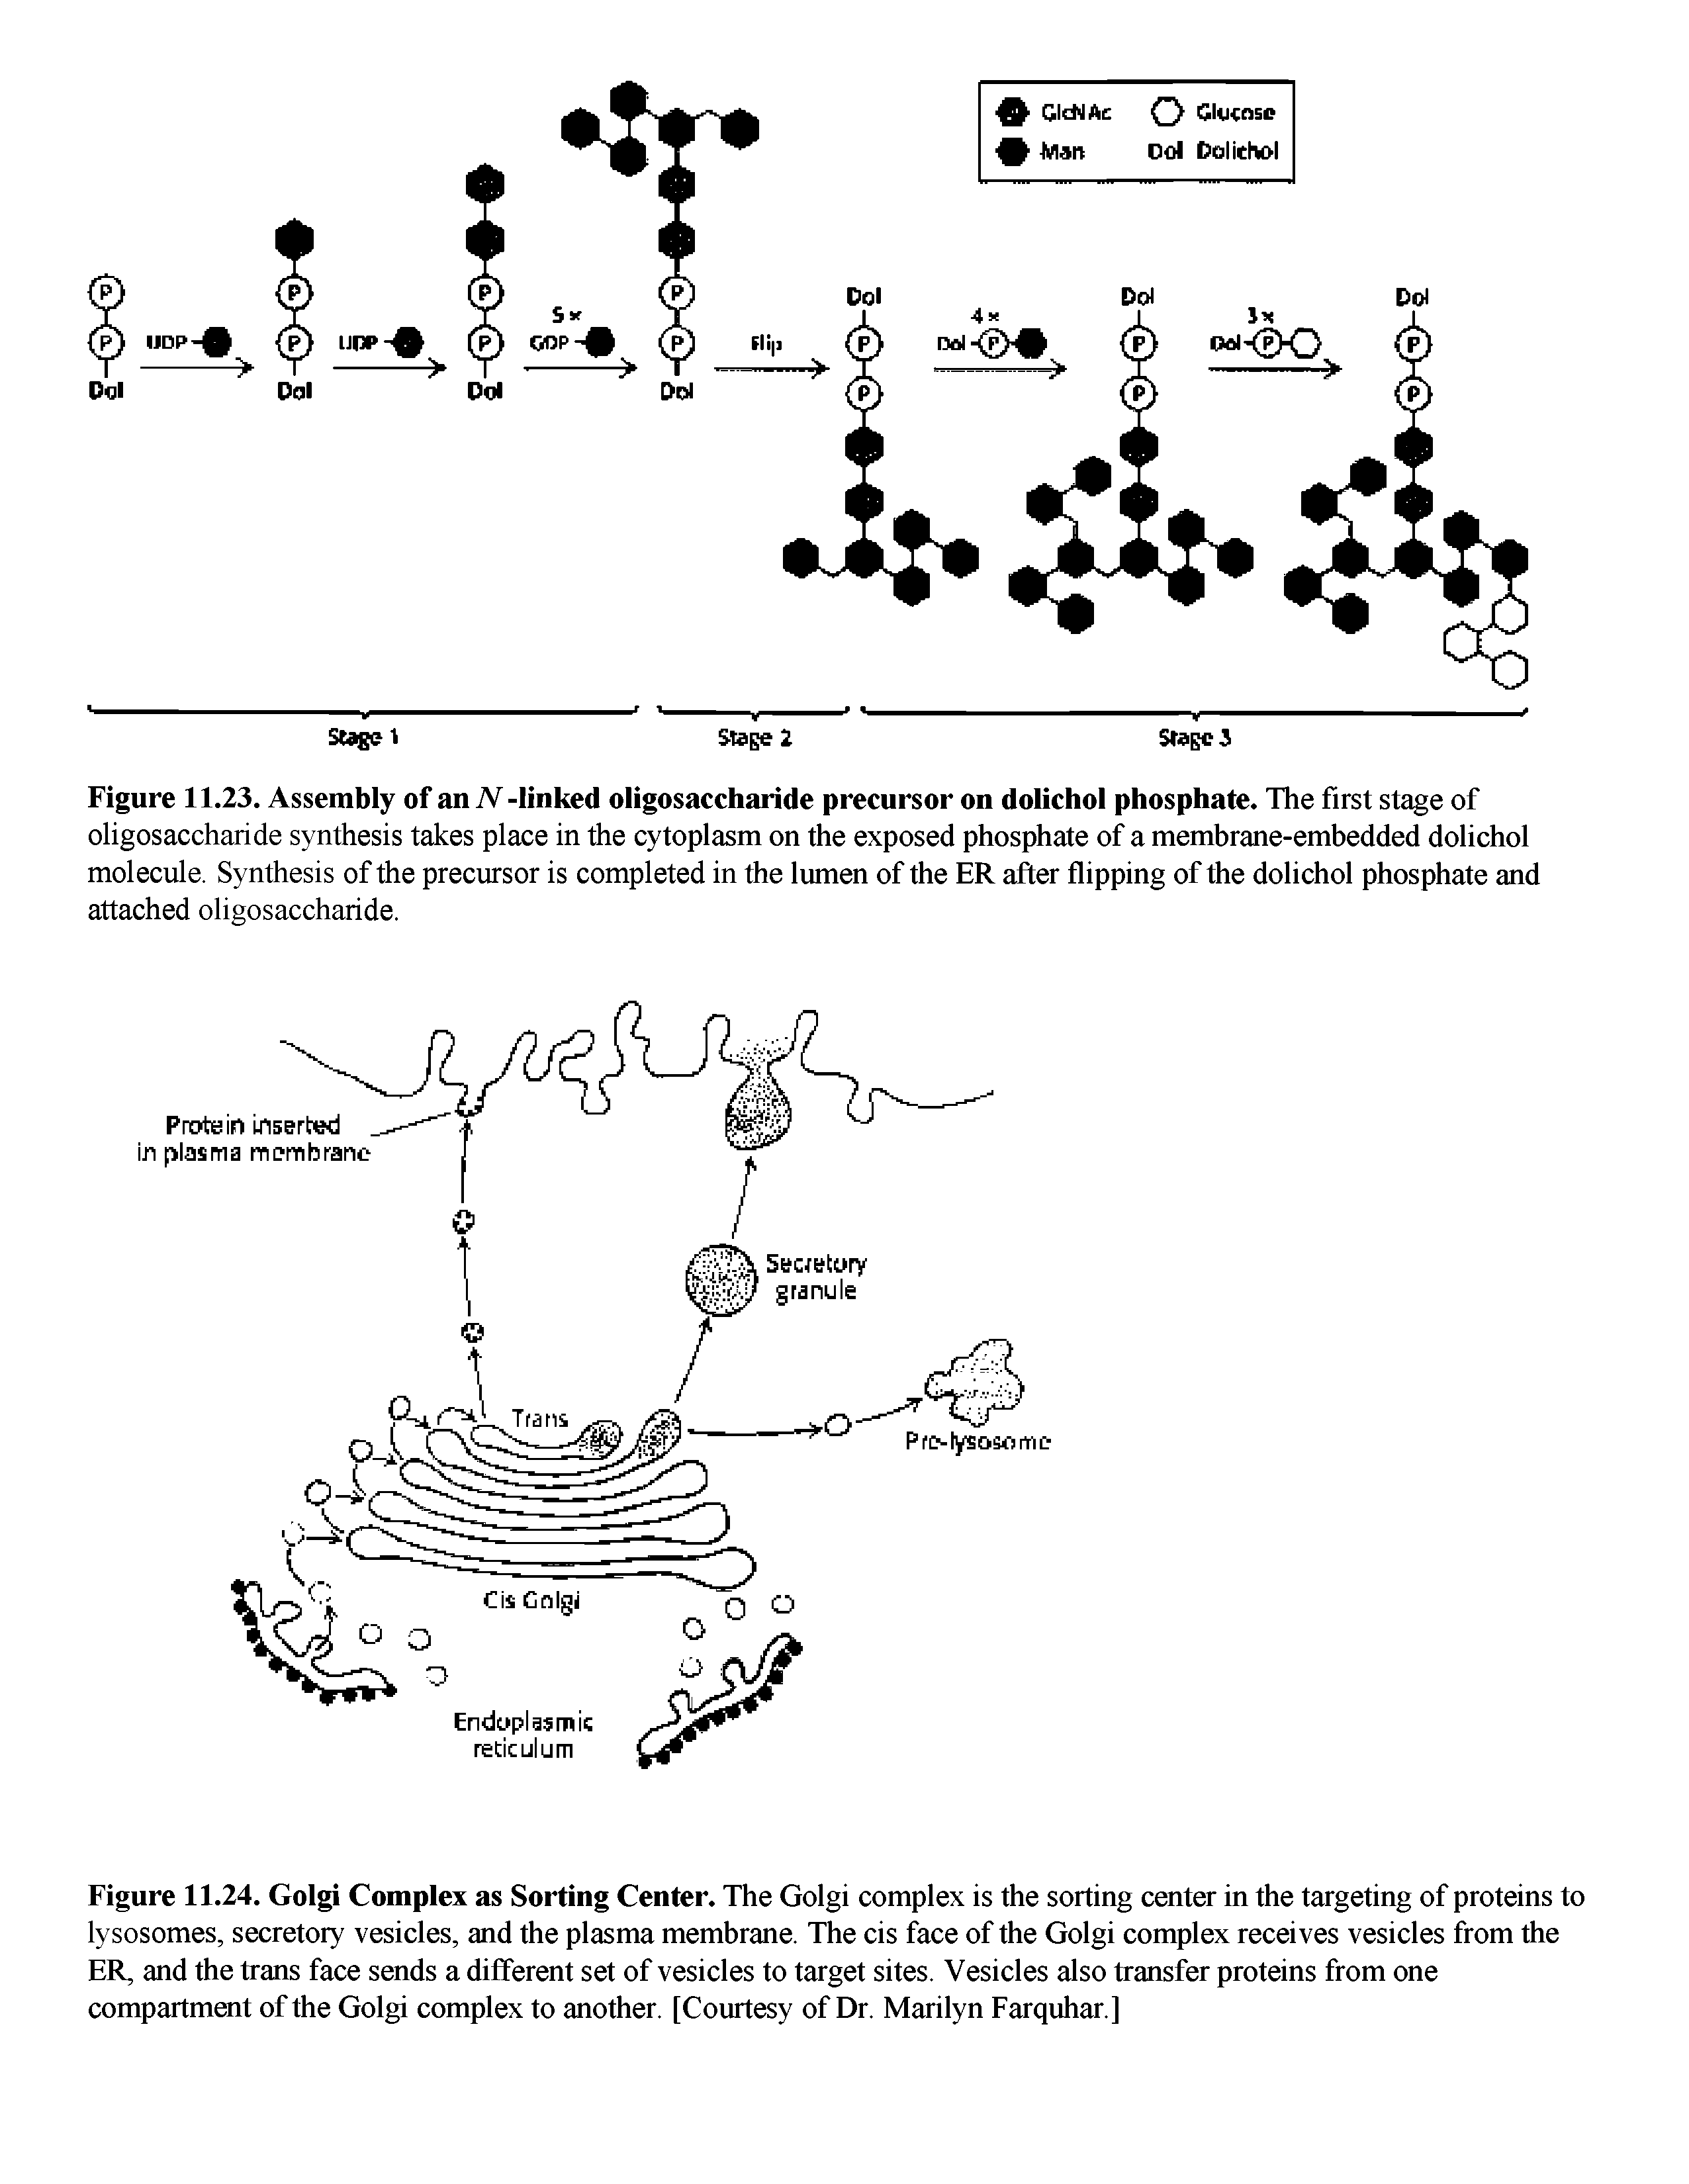 Figure 11.23. Assembly of an -linked oligosaccharide precursor on dolichol phosphate. The first stage of oligosaccharide synthesis takes place in the cytoplasm on the exposed phosphate of a membrane-embedded dolichol molecule. Synthesis of the precursor is completed in the lumen of the ER after flipping of the dolichol phosphate and attached oligosaccharide.